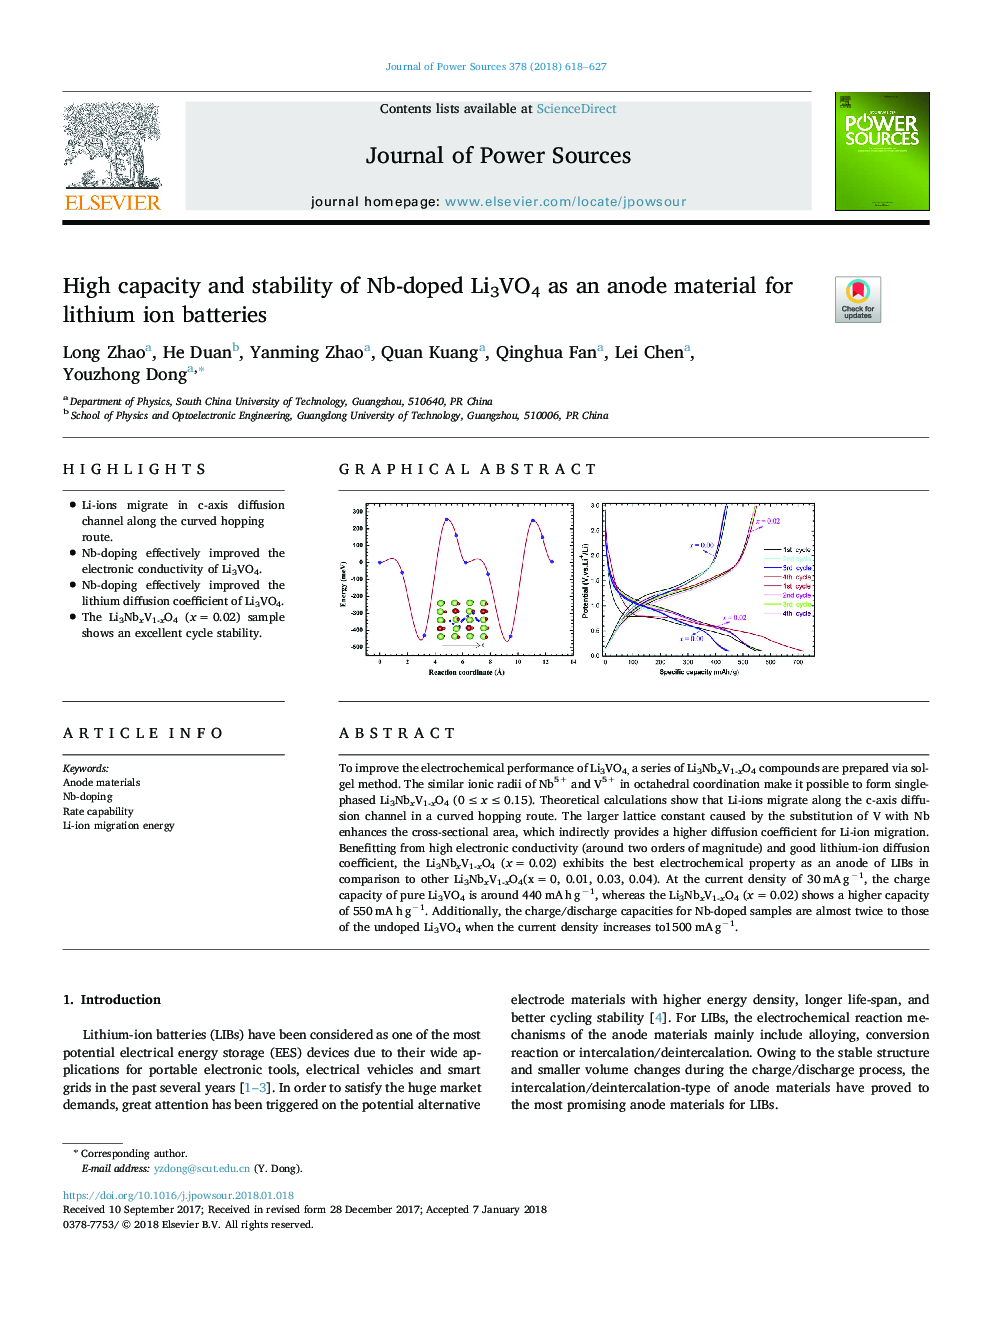 High capacity and stability of Nb-doped Li3VO4 as an anode material for lithium ion batteries